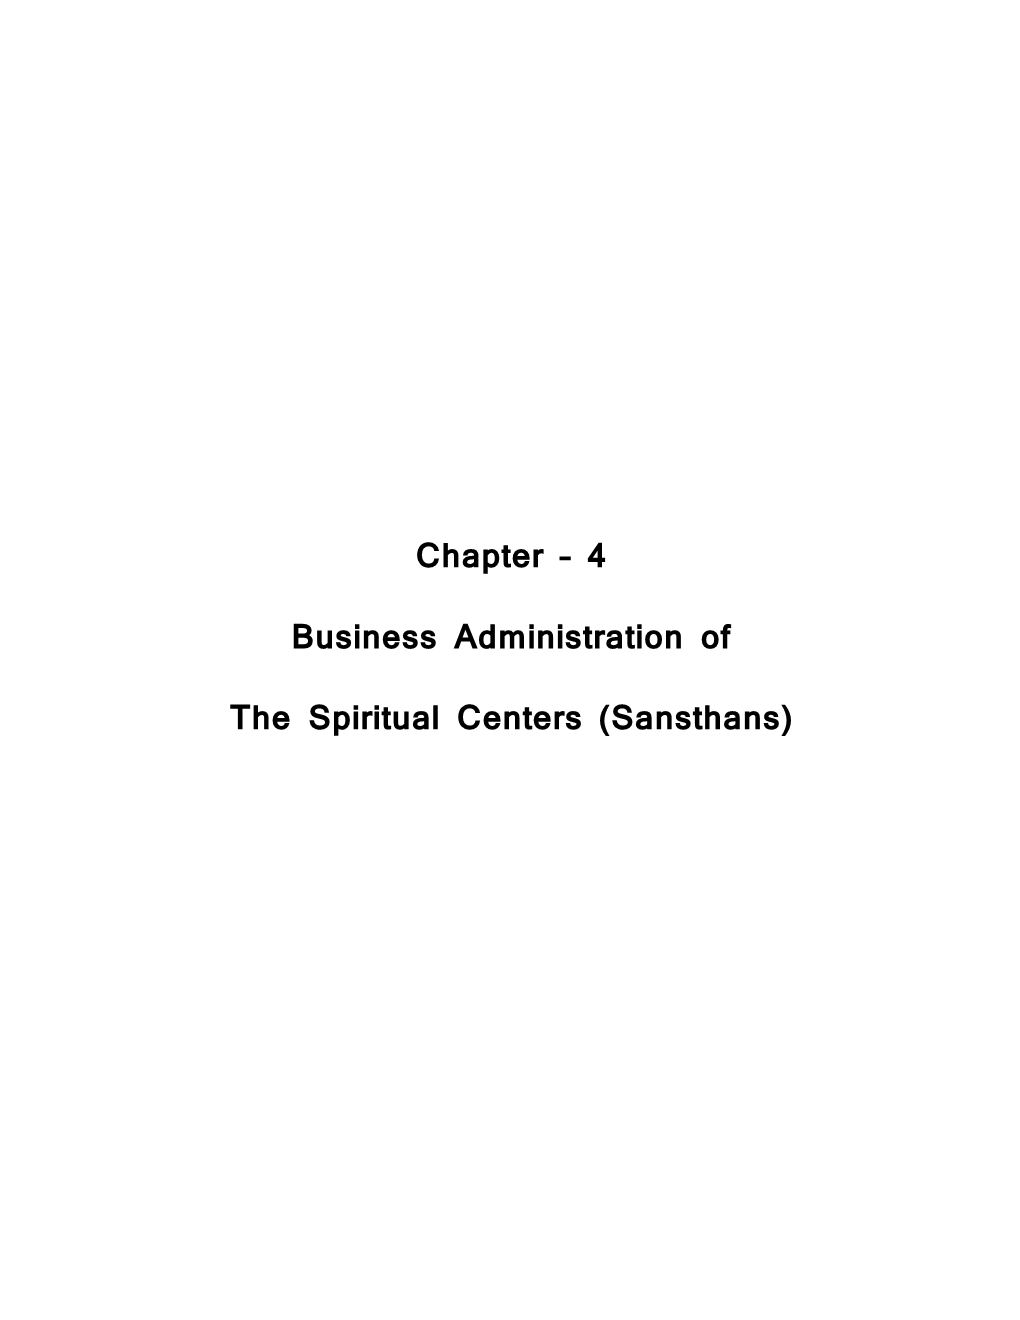 Chapter – 4 Business Administration of the Spiritual Centers (Sansthans)